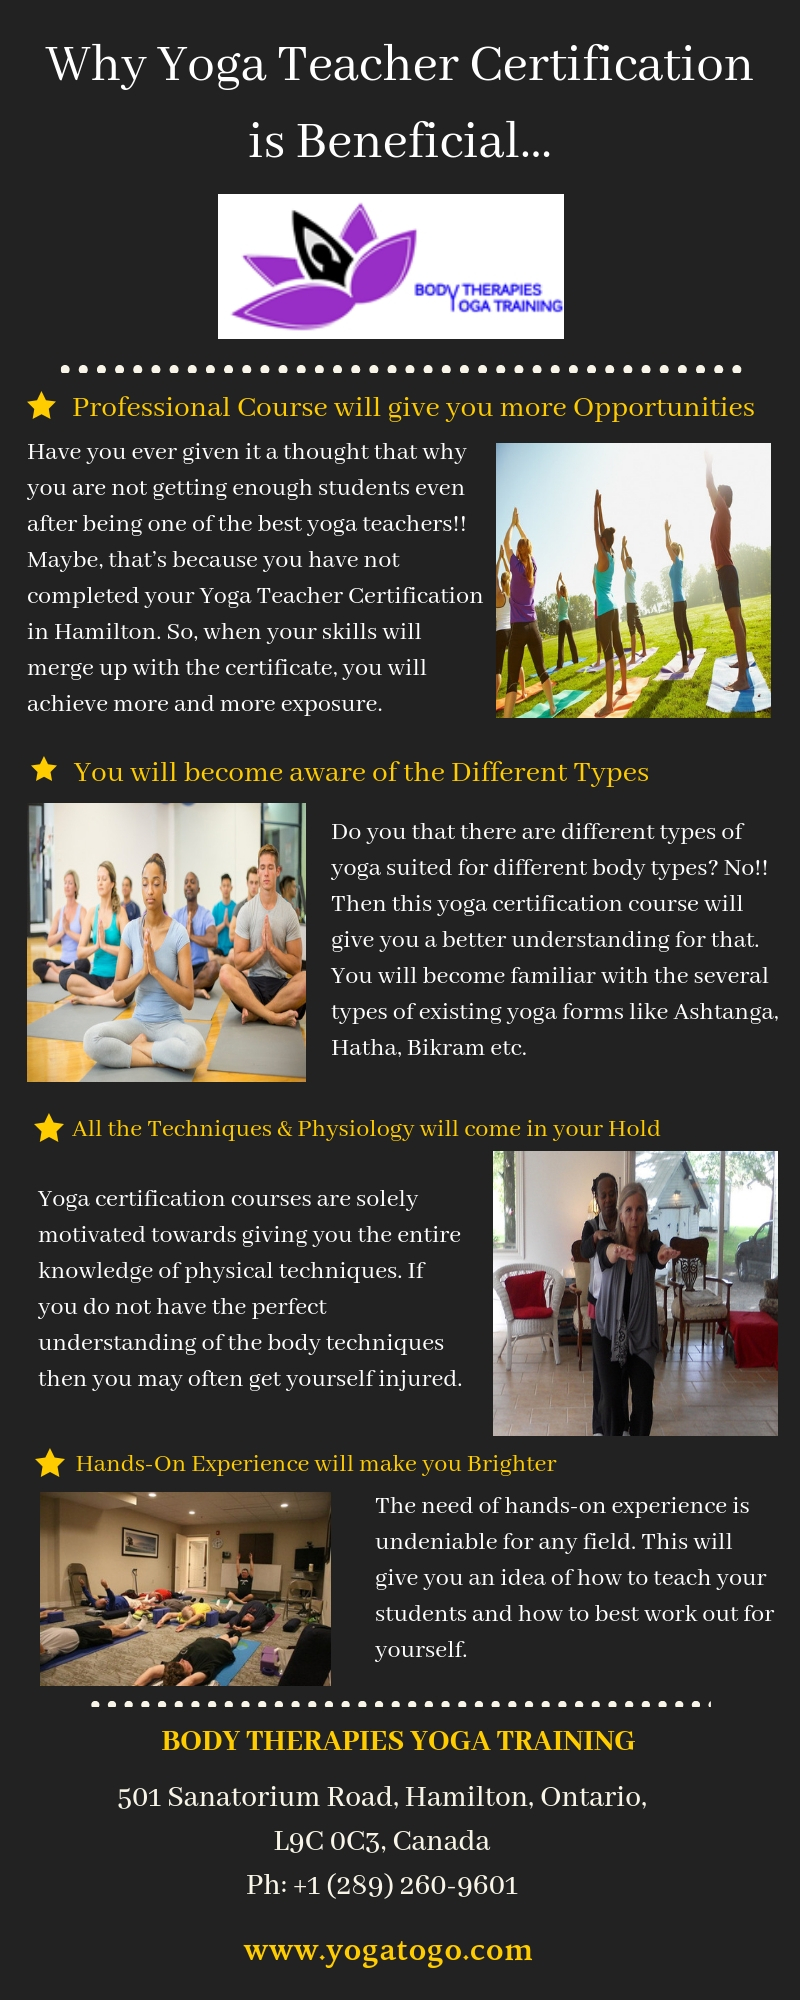 Why Yoga Teacher Certification is Beneficial….jpg  by yogatogo